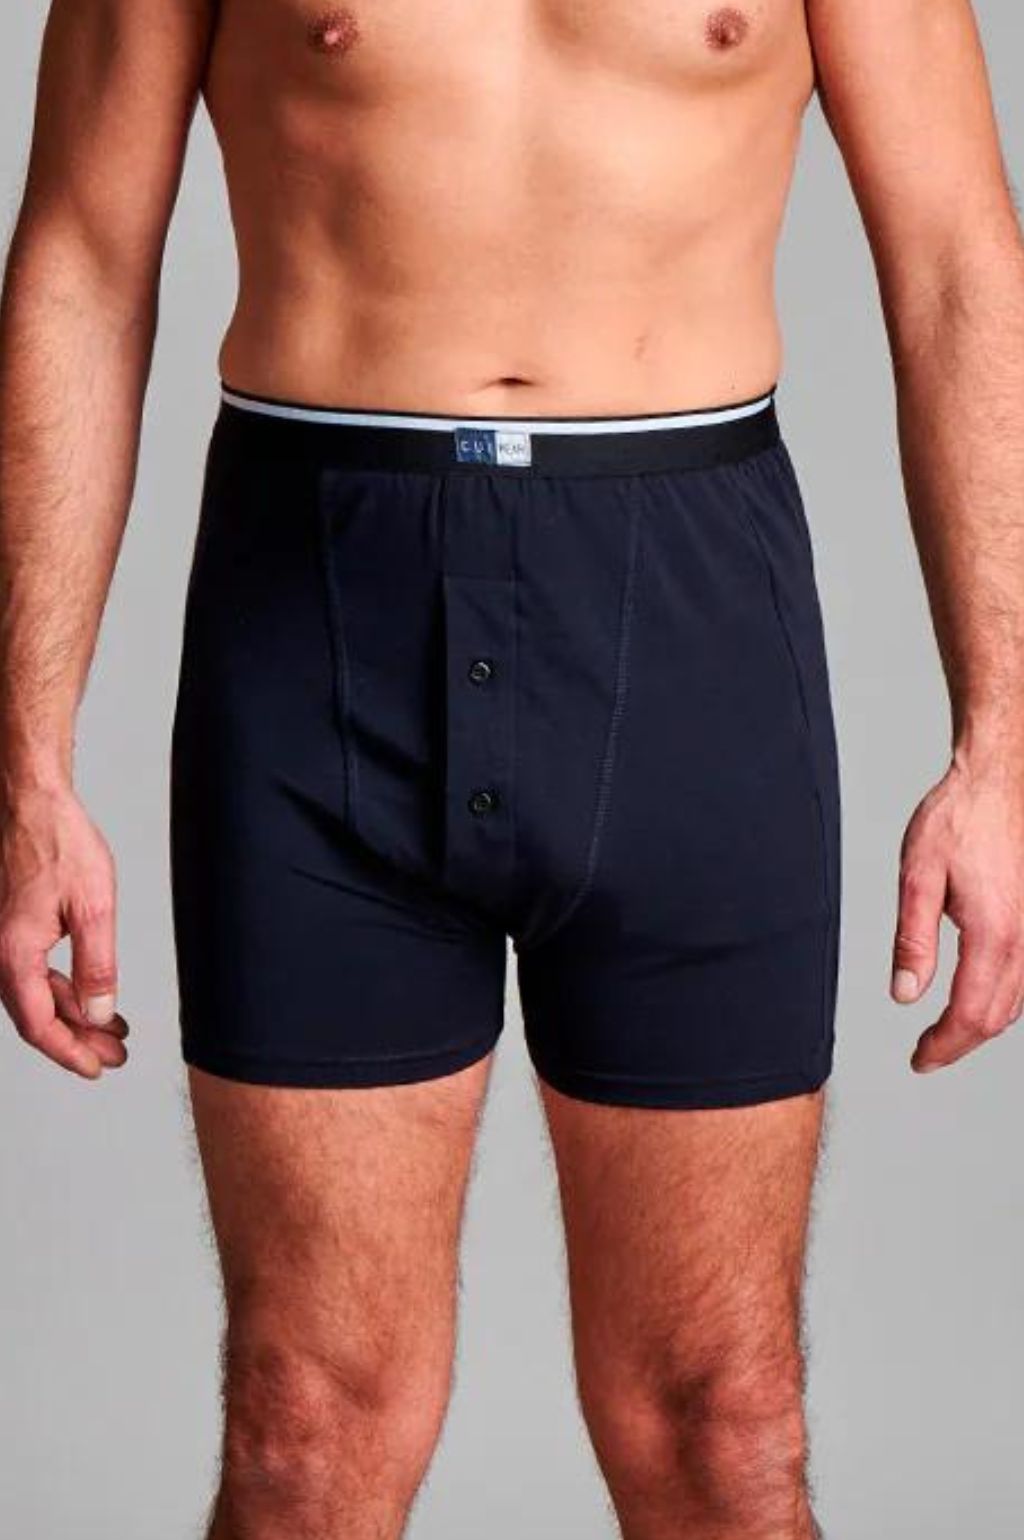 CUI Mens Ostomy High Waist Cotton Fitted Trunk - 1 each, SMALL, NAVY - TWIN